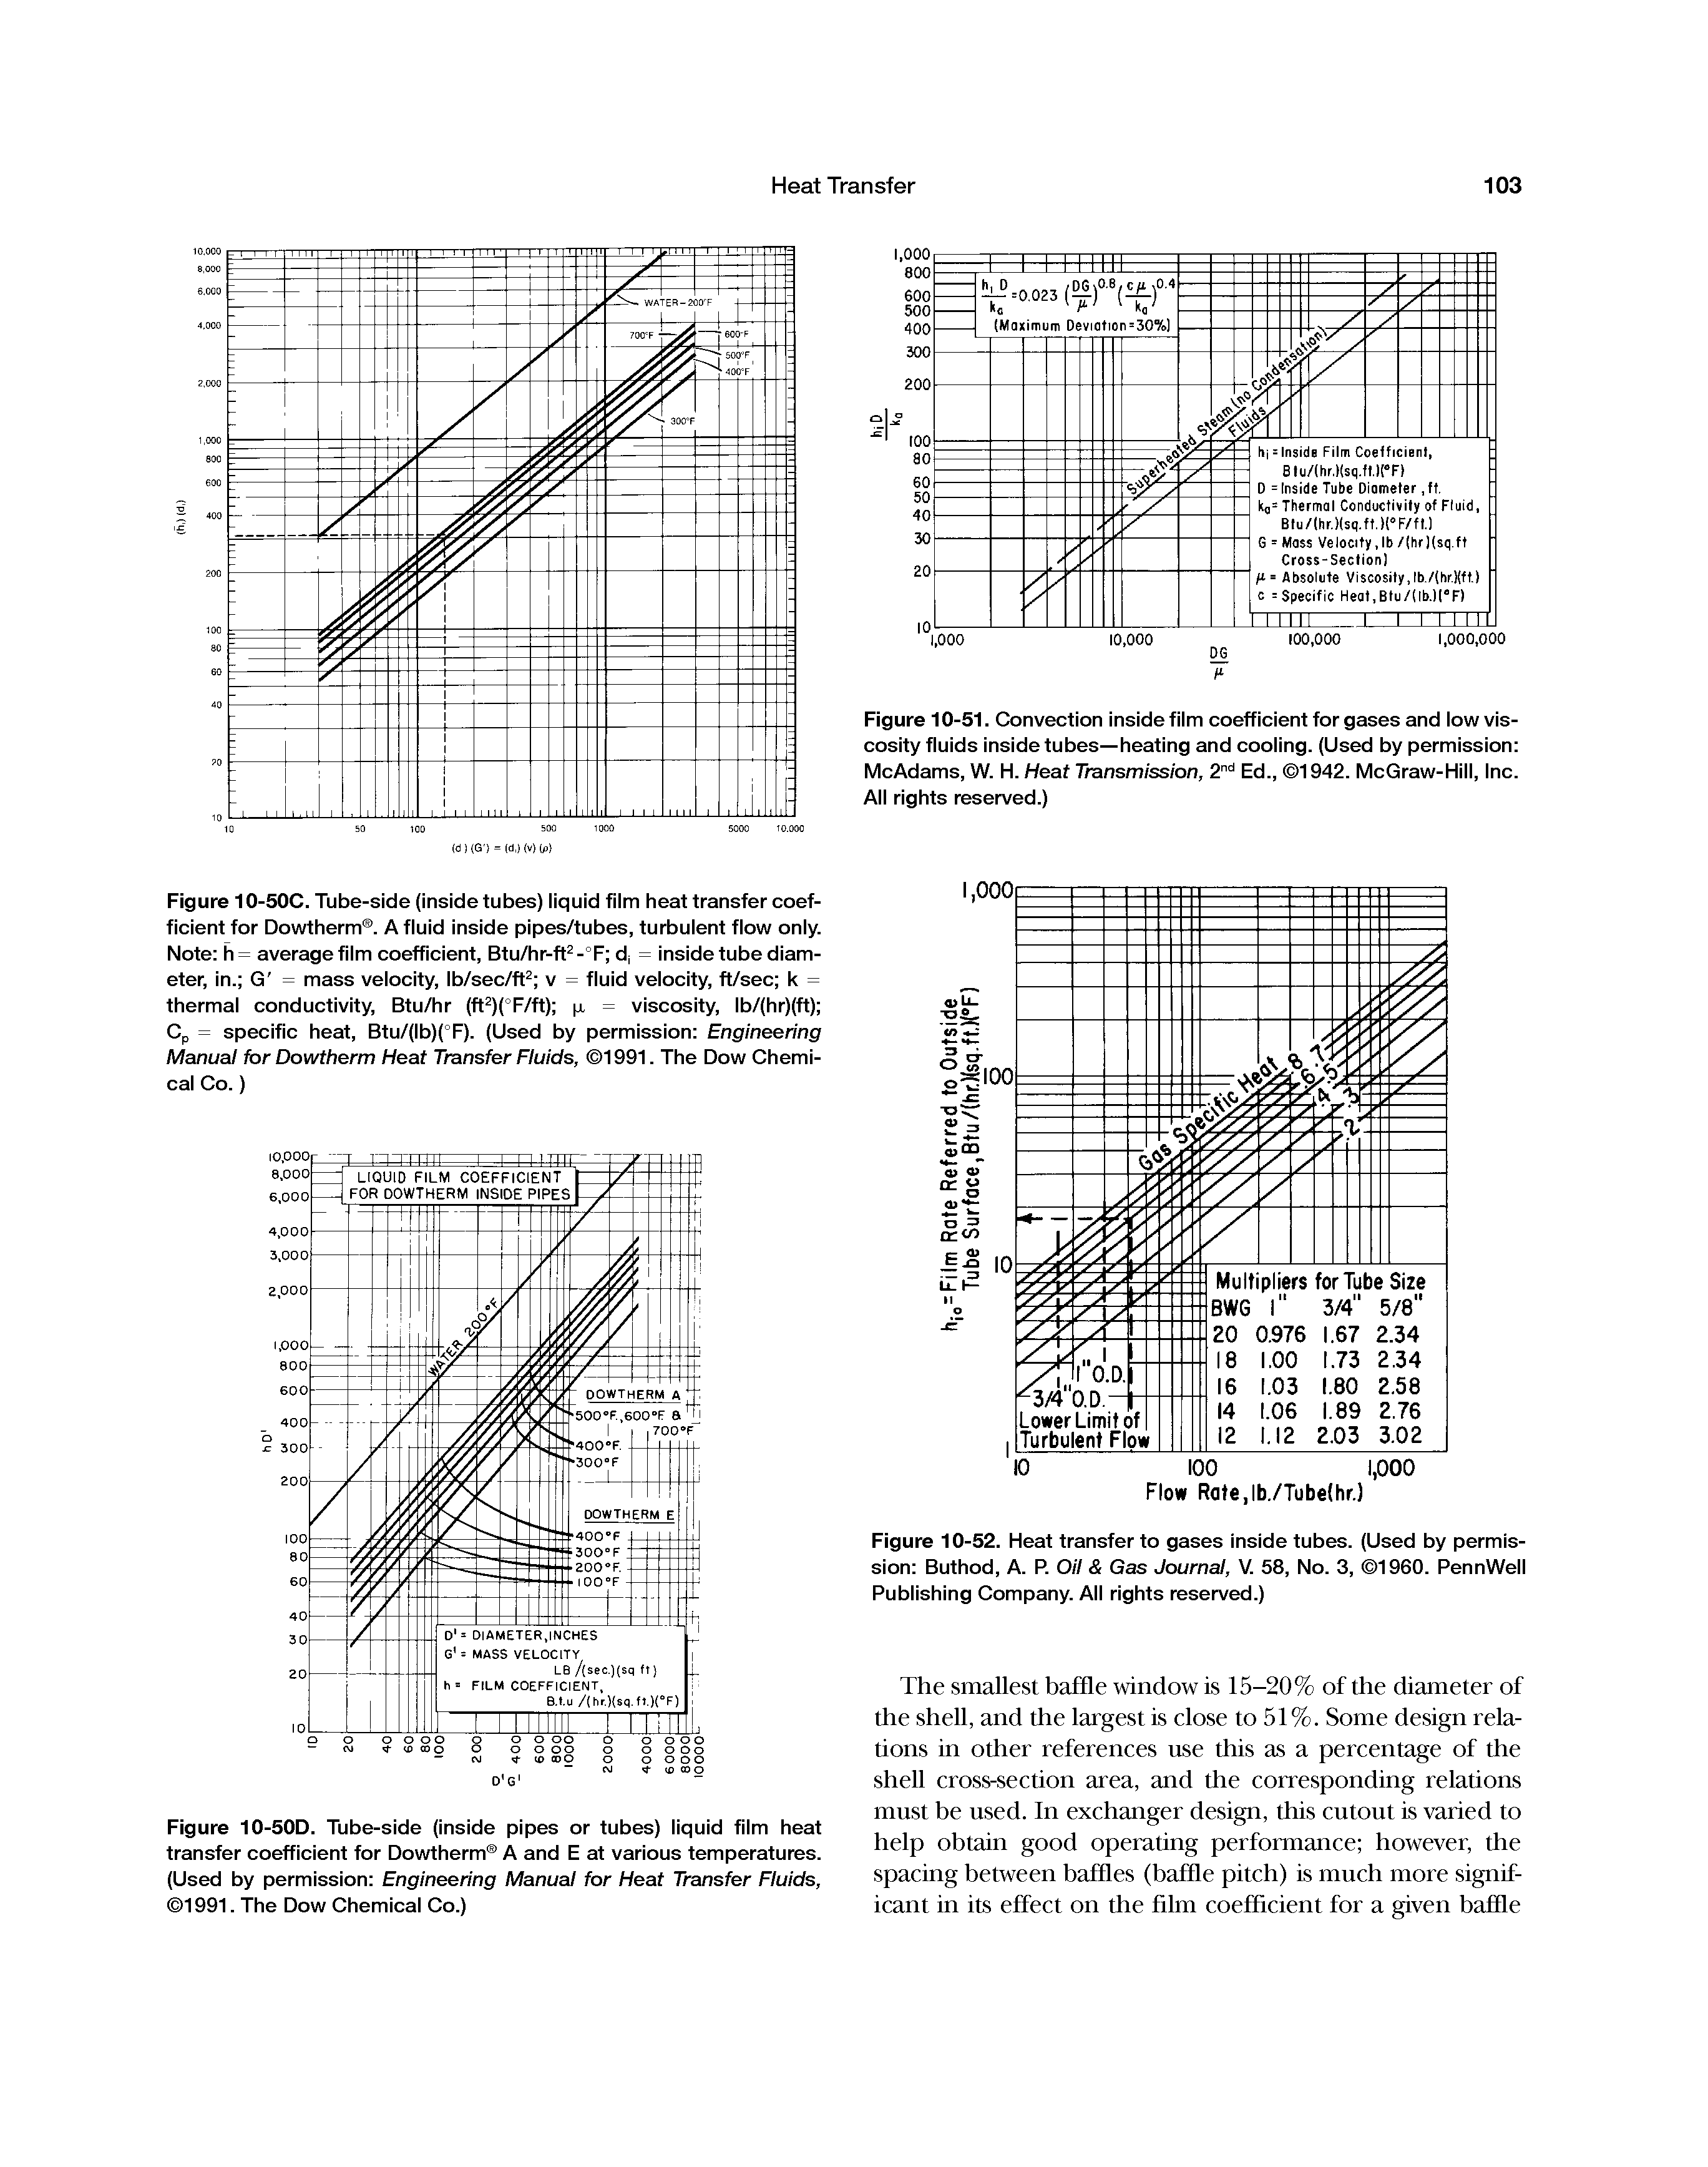 Figure 10-51. Convection inside film coefficient for gases and low viscosity fluids inside tubes—heating and cooling. (Used by permission McAdams, W. H. Heat Transmission, 2"= Ed., 1942. McGraw-Hill, Inc. All rights reserved.)...